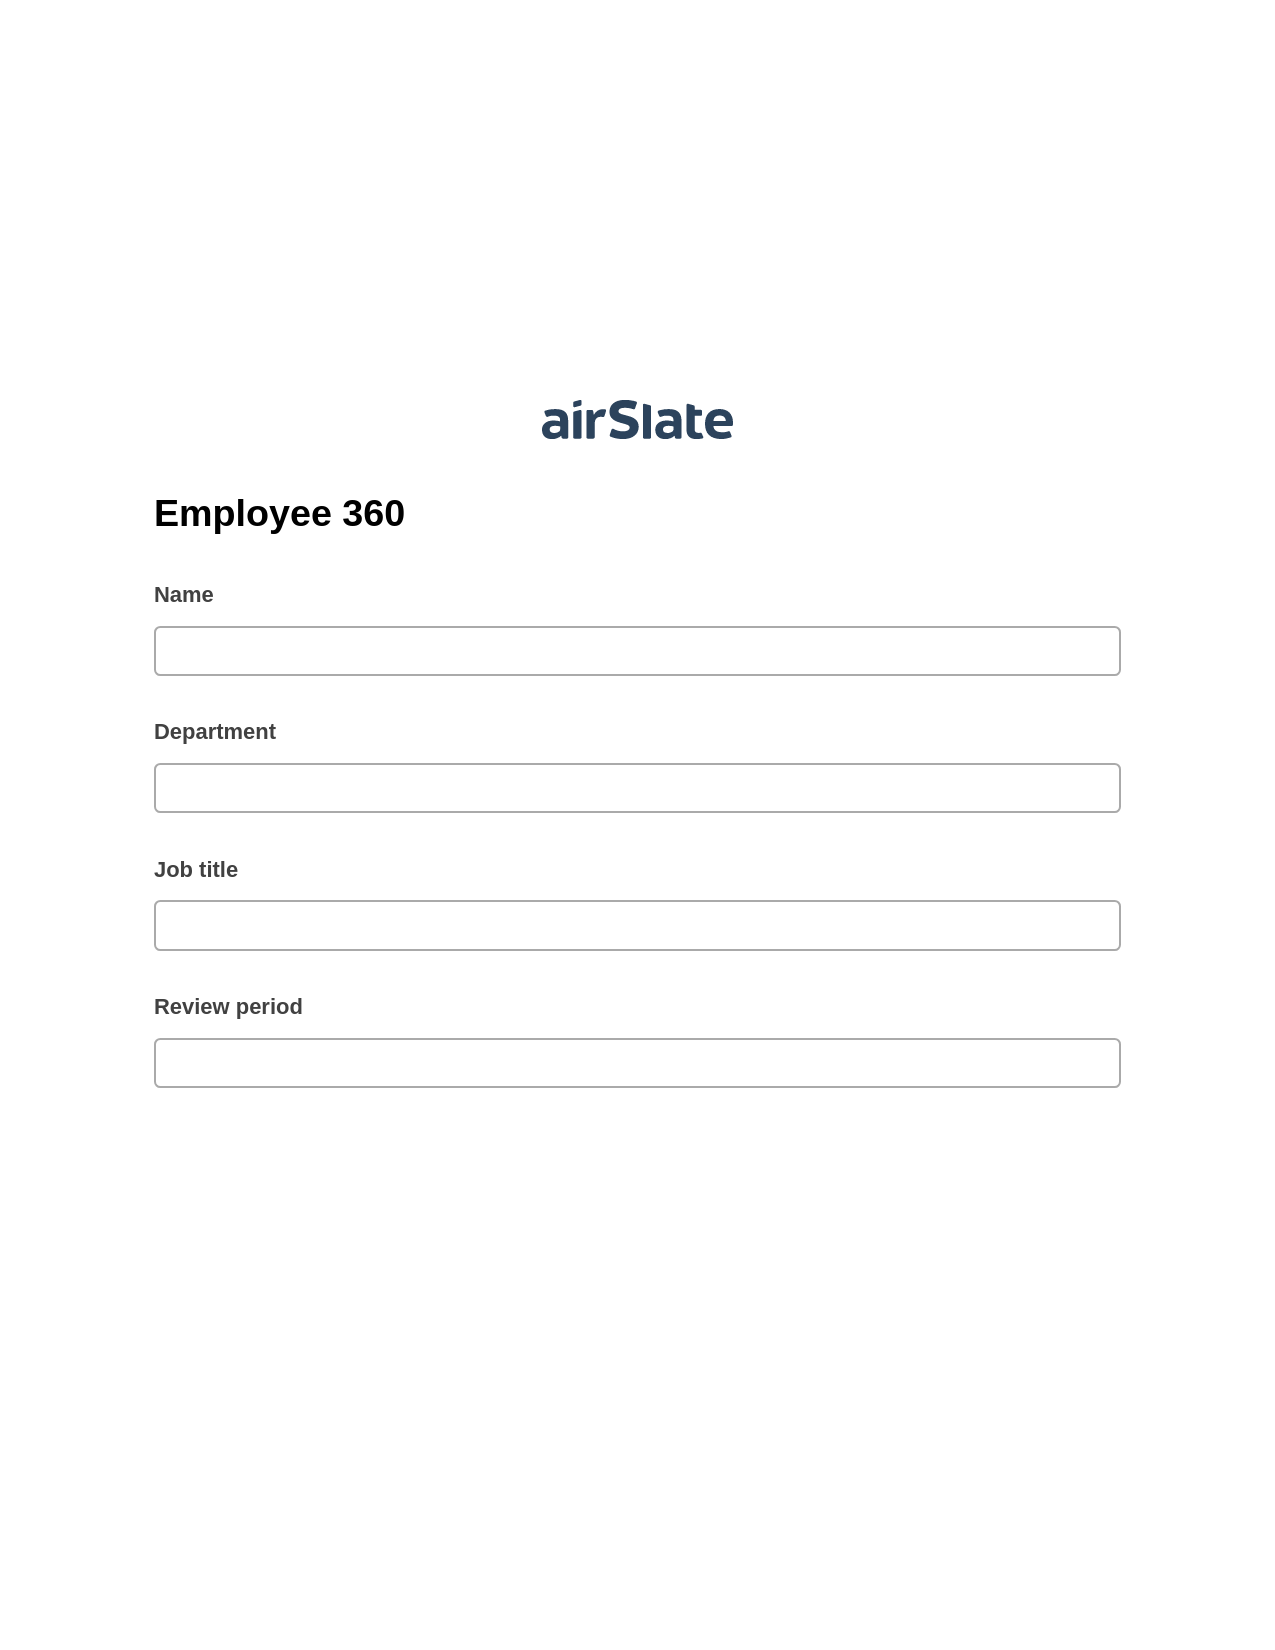 Employee 360 Pre-fill from another Slate Bot, Export to MS Dynamics 365 Bot, Post-finish Document Bot